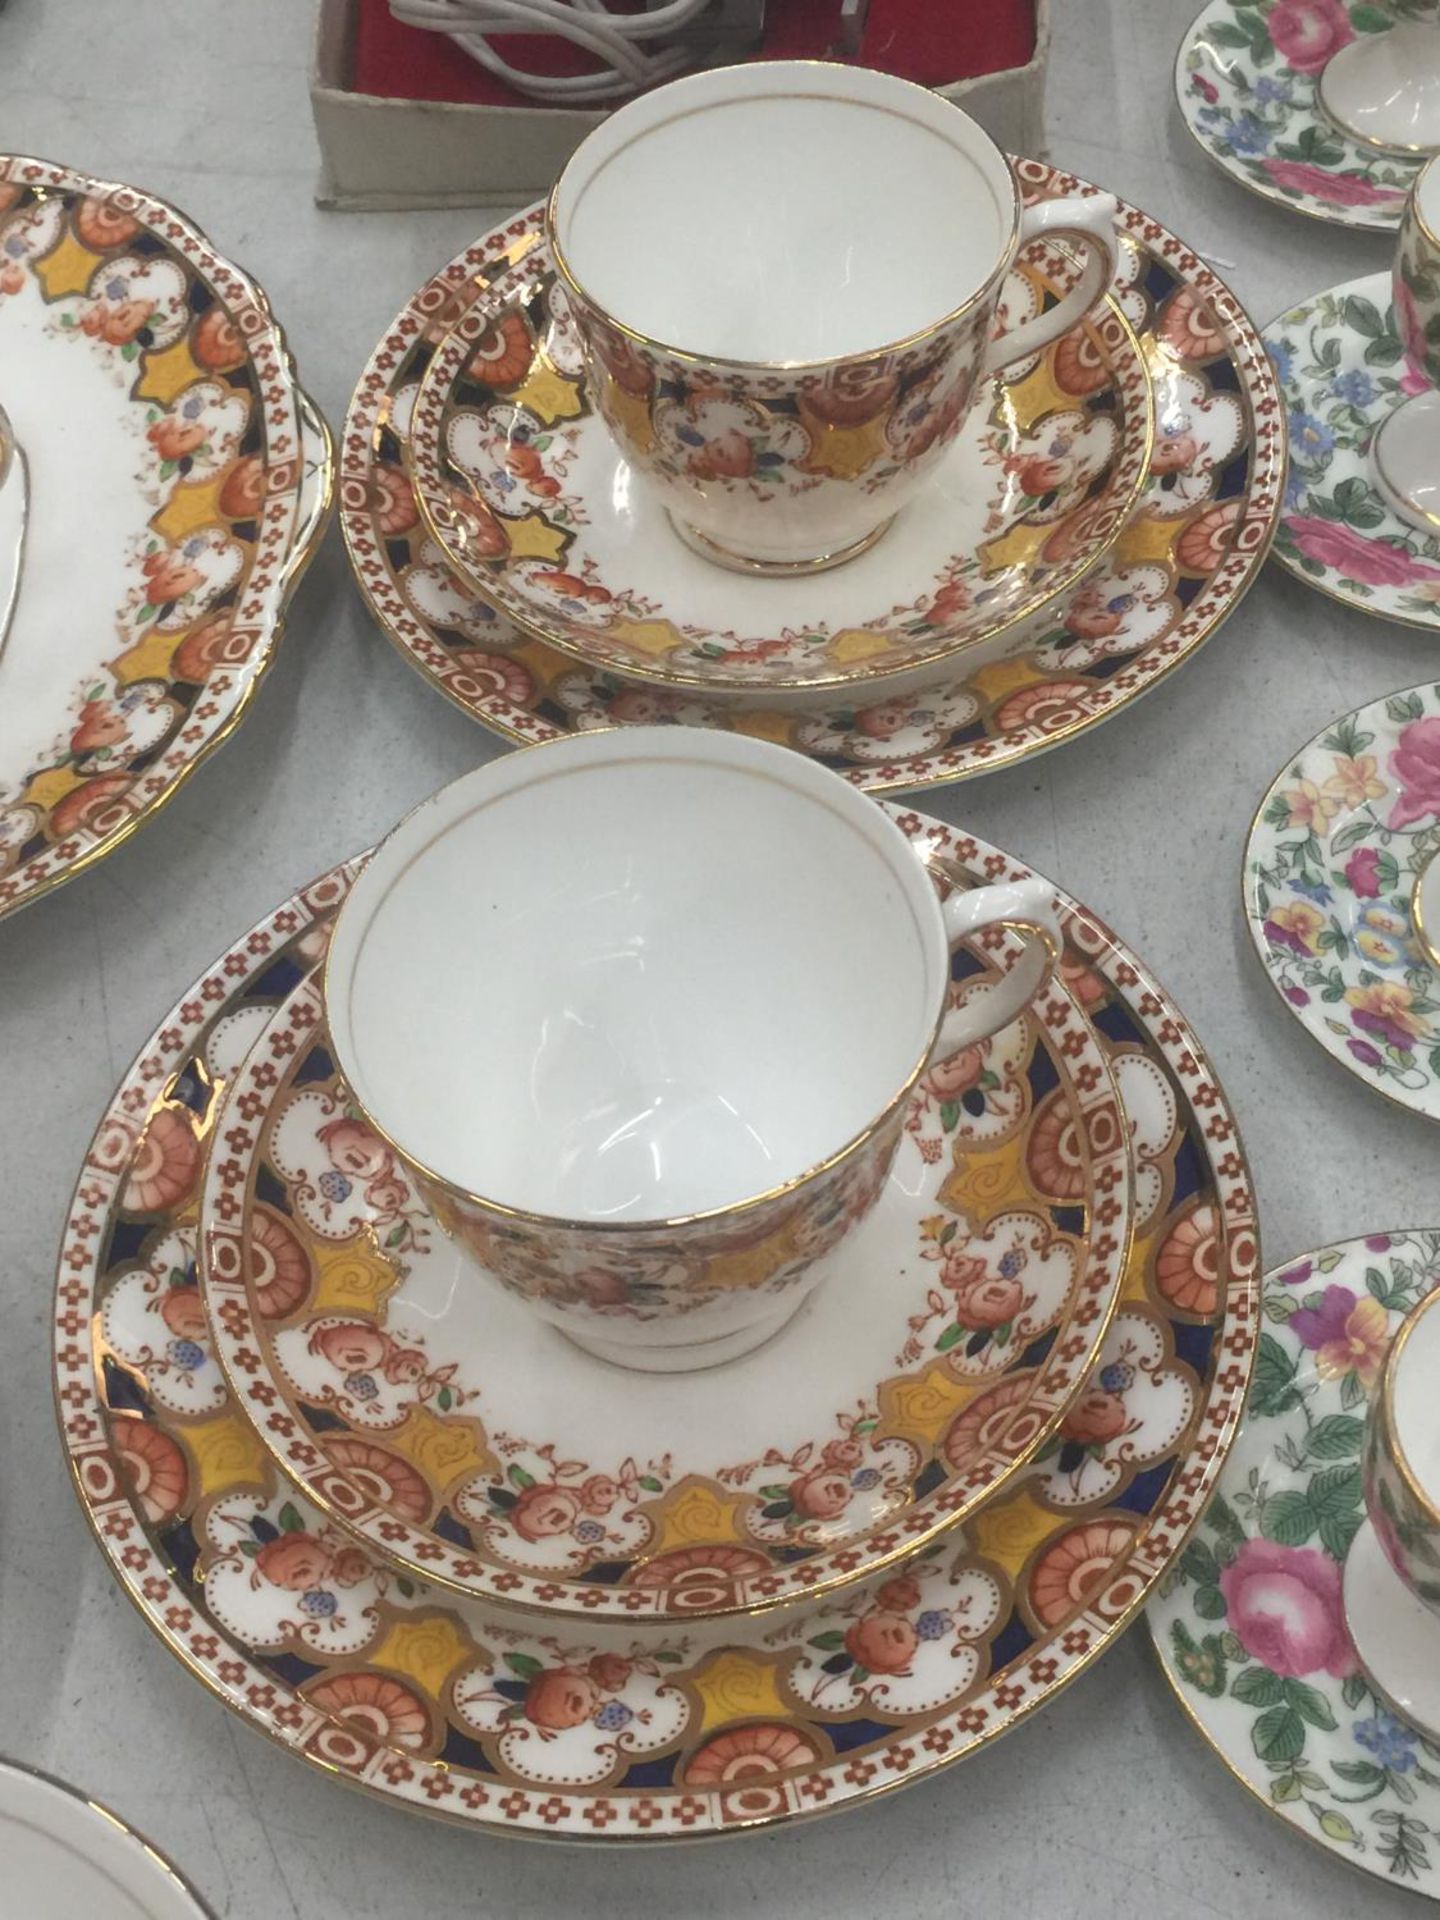 A QUANTITY OF SALISBURY CHINA 'TYNE' TO INCLUDE CAKE PLATE, CUPS, SAUCERS, SIDE PLATES AND A SUGAR - Image 5 of 6